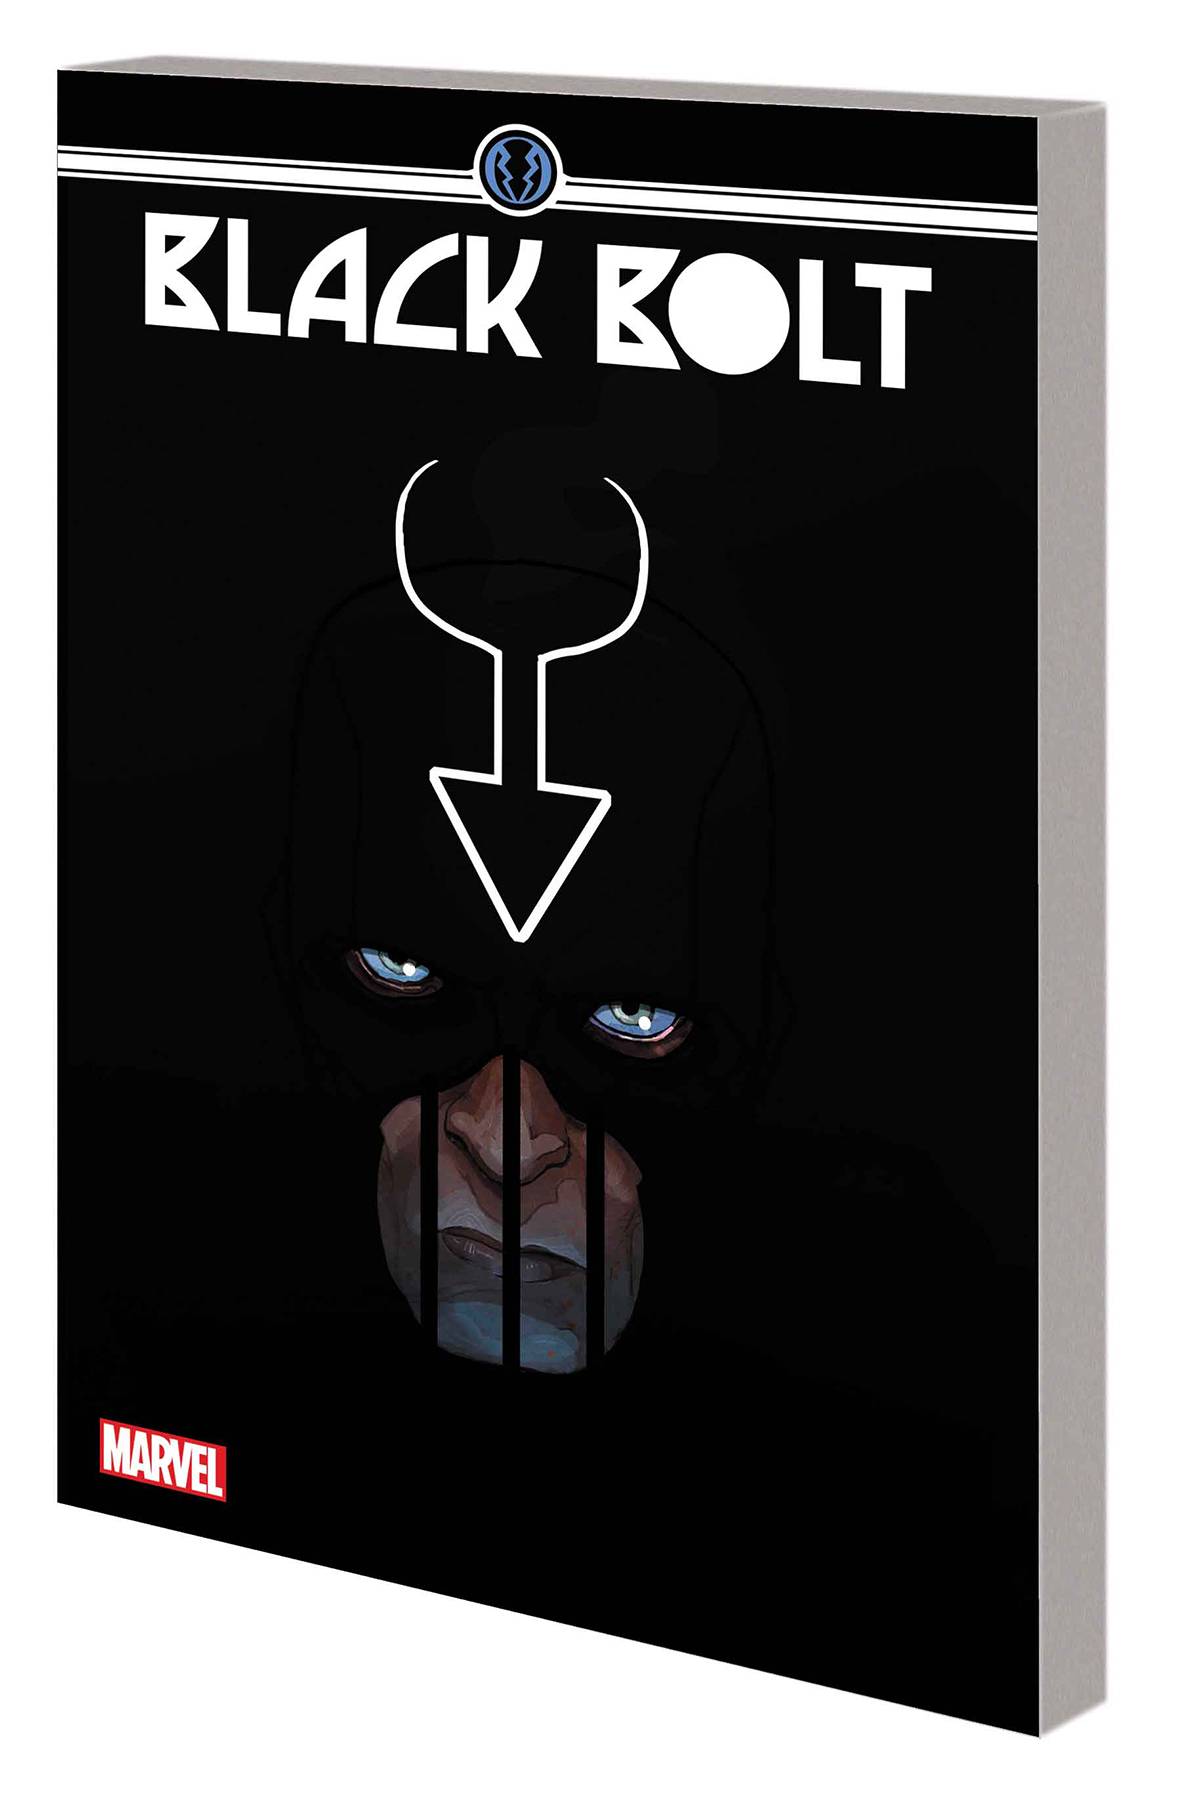 Black Bolt by Saladin Ahmed and Christian Ward